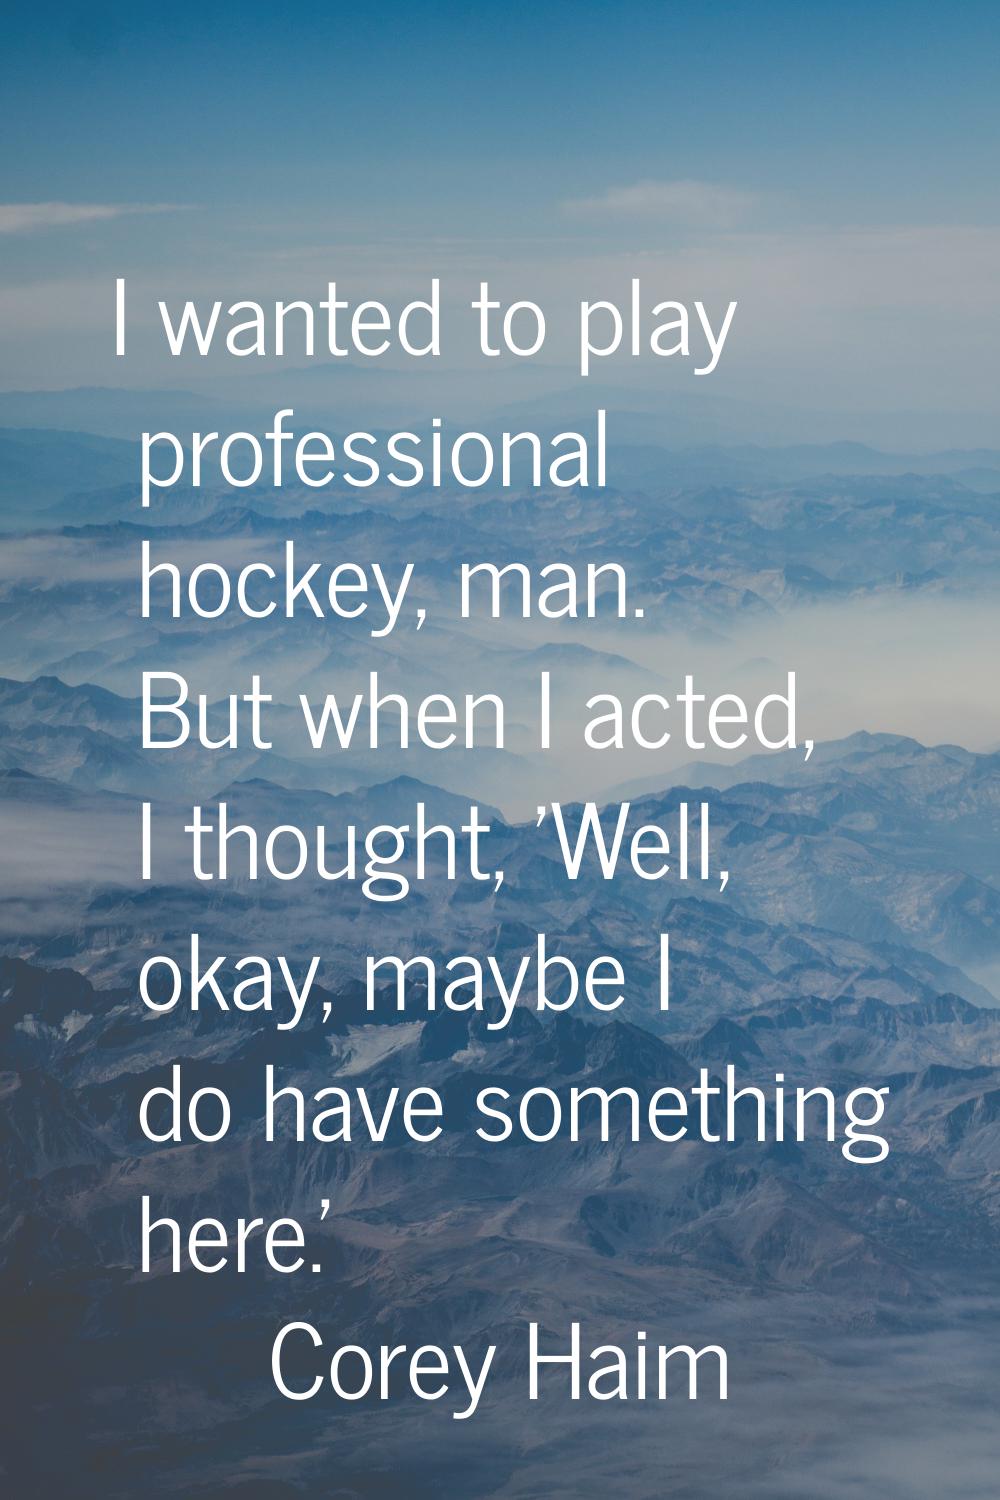 I wanted to play professional hockey, man. But when I acted, I thought, 'Well, okay, maybe I do hav